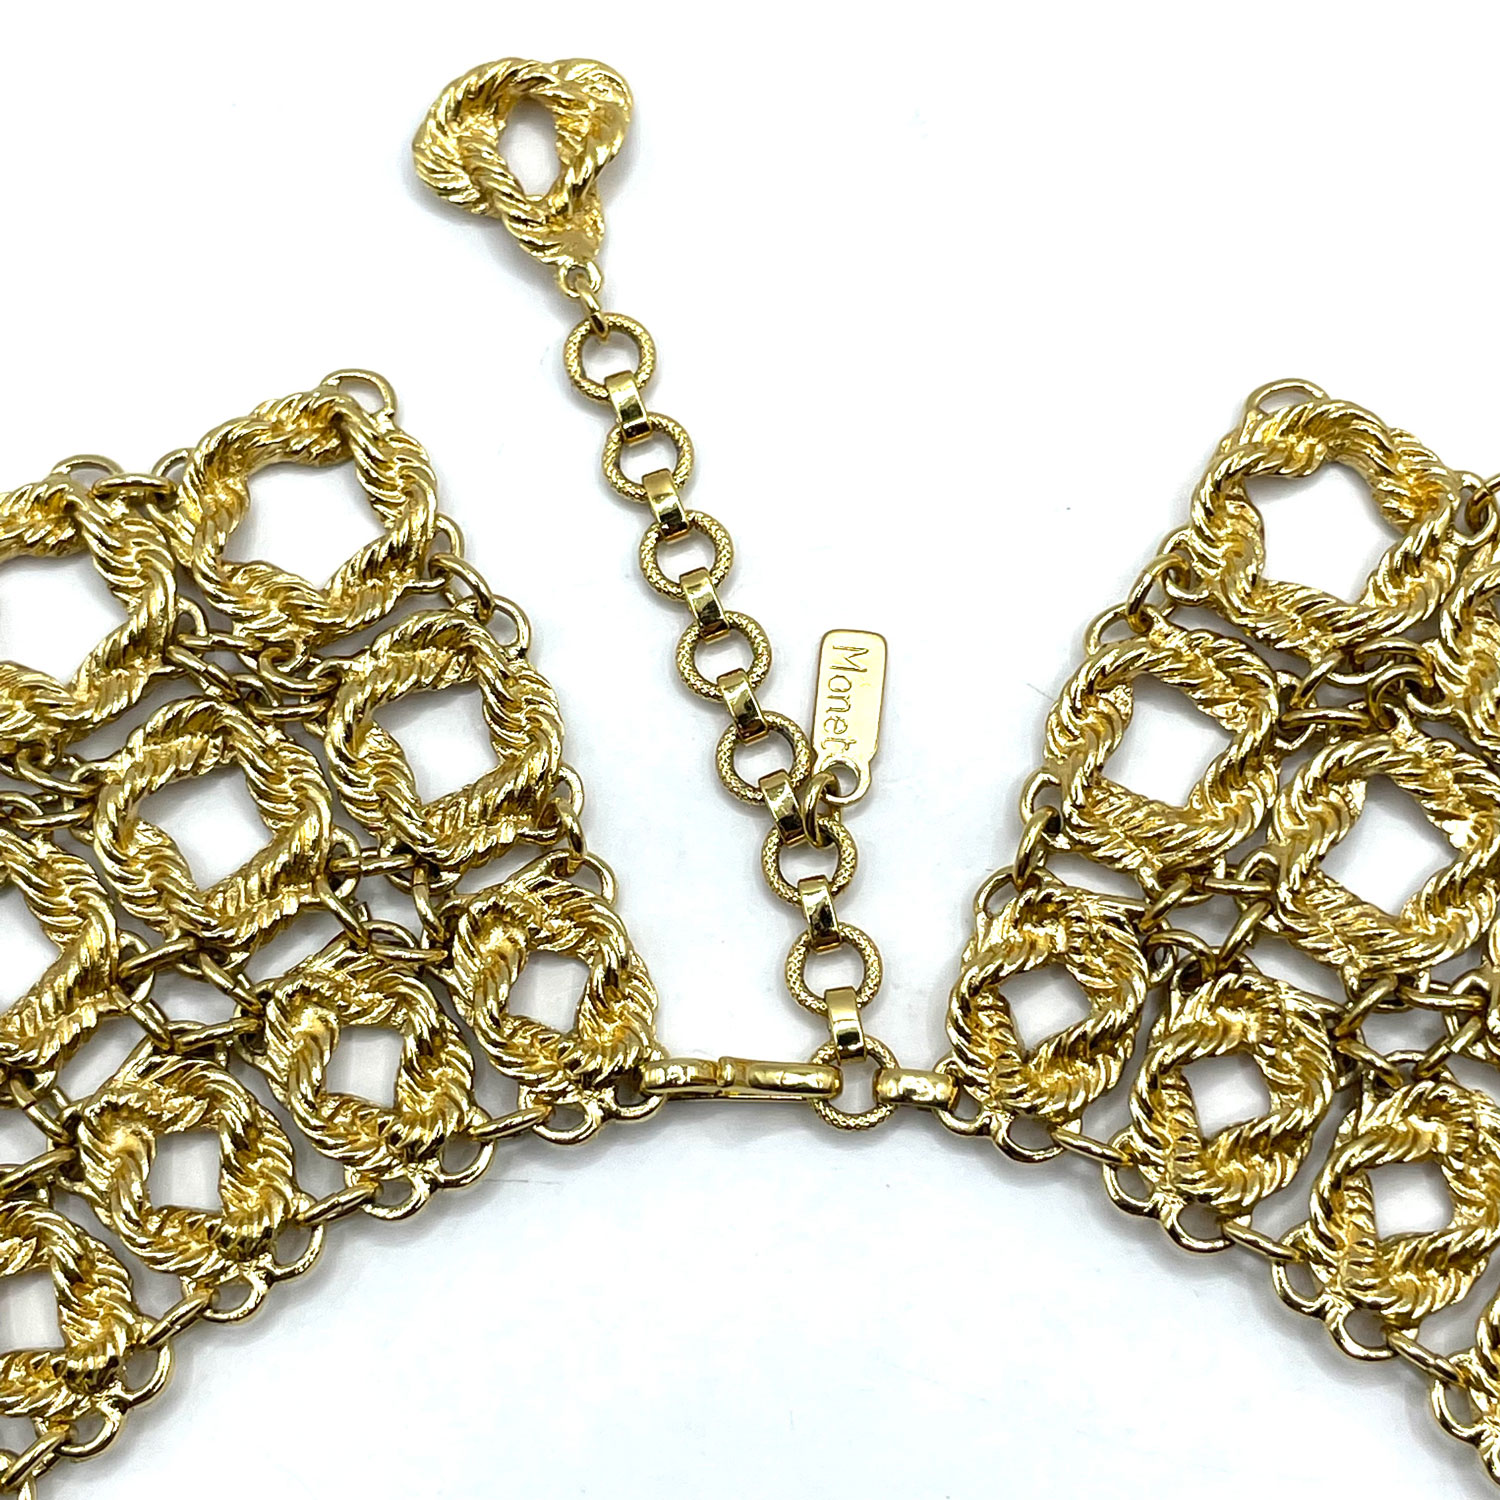 Collar necklace by Monet